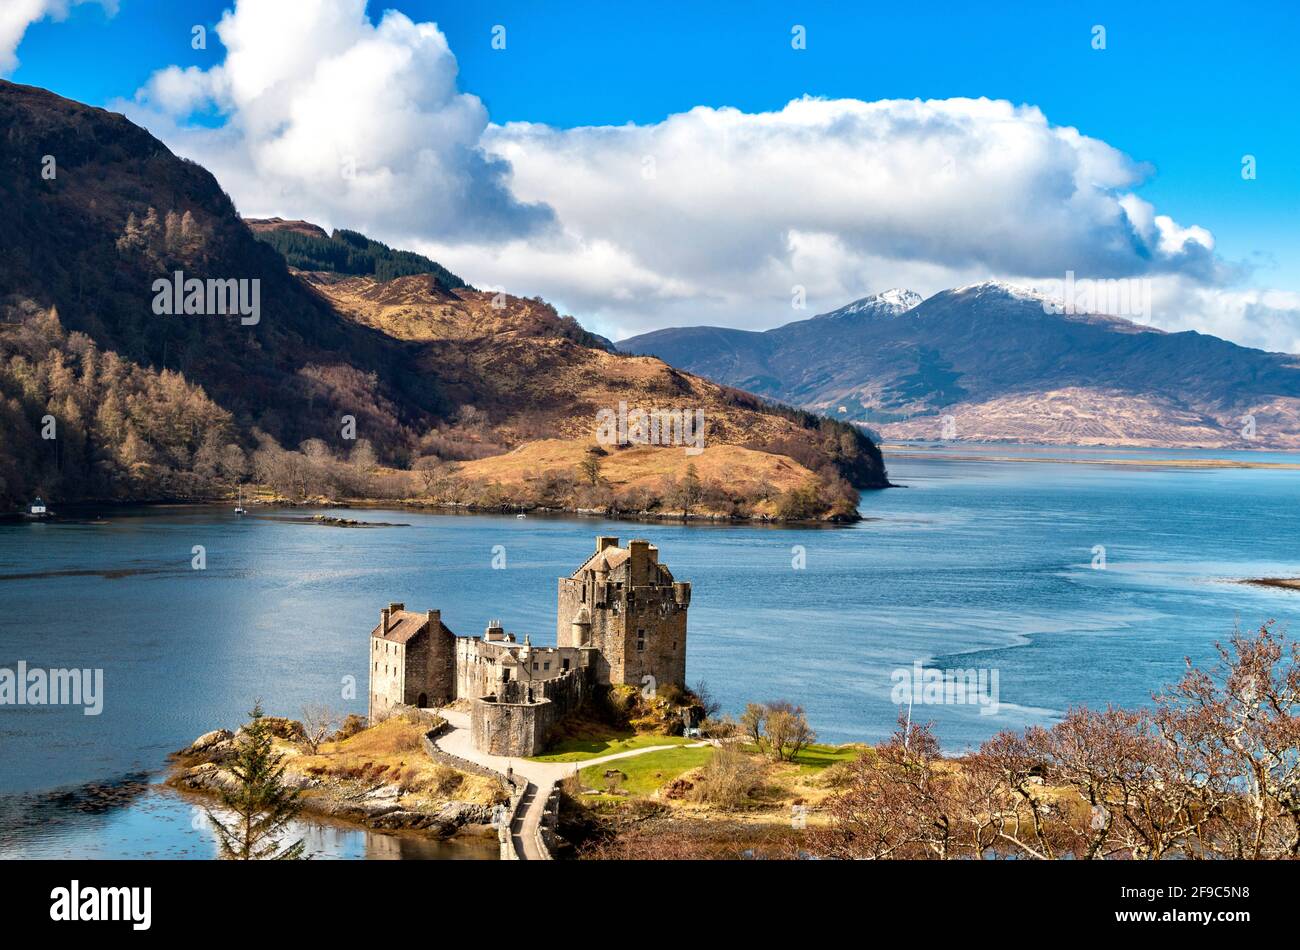 EILEAN DONAN CASTLE LOCH DUICH HIGHLANDS SCOTLAND IN SPRING SNOW CAPPED MOUNTAINS IN THE DISTANCE Stock Photo